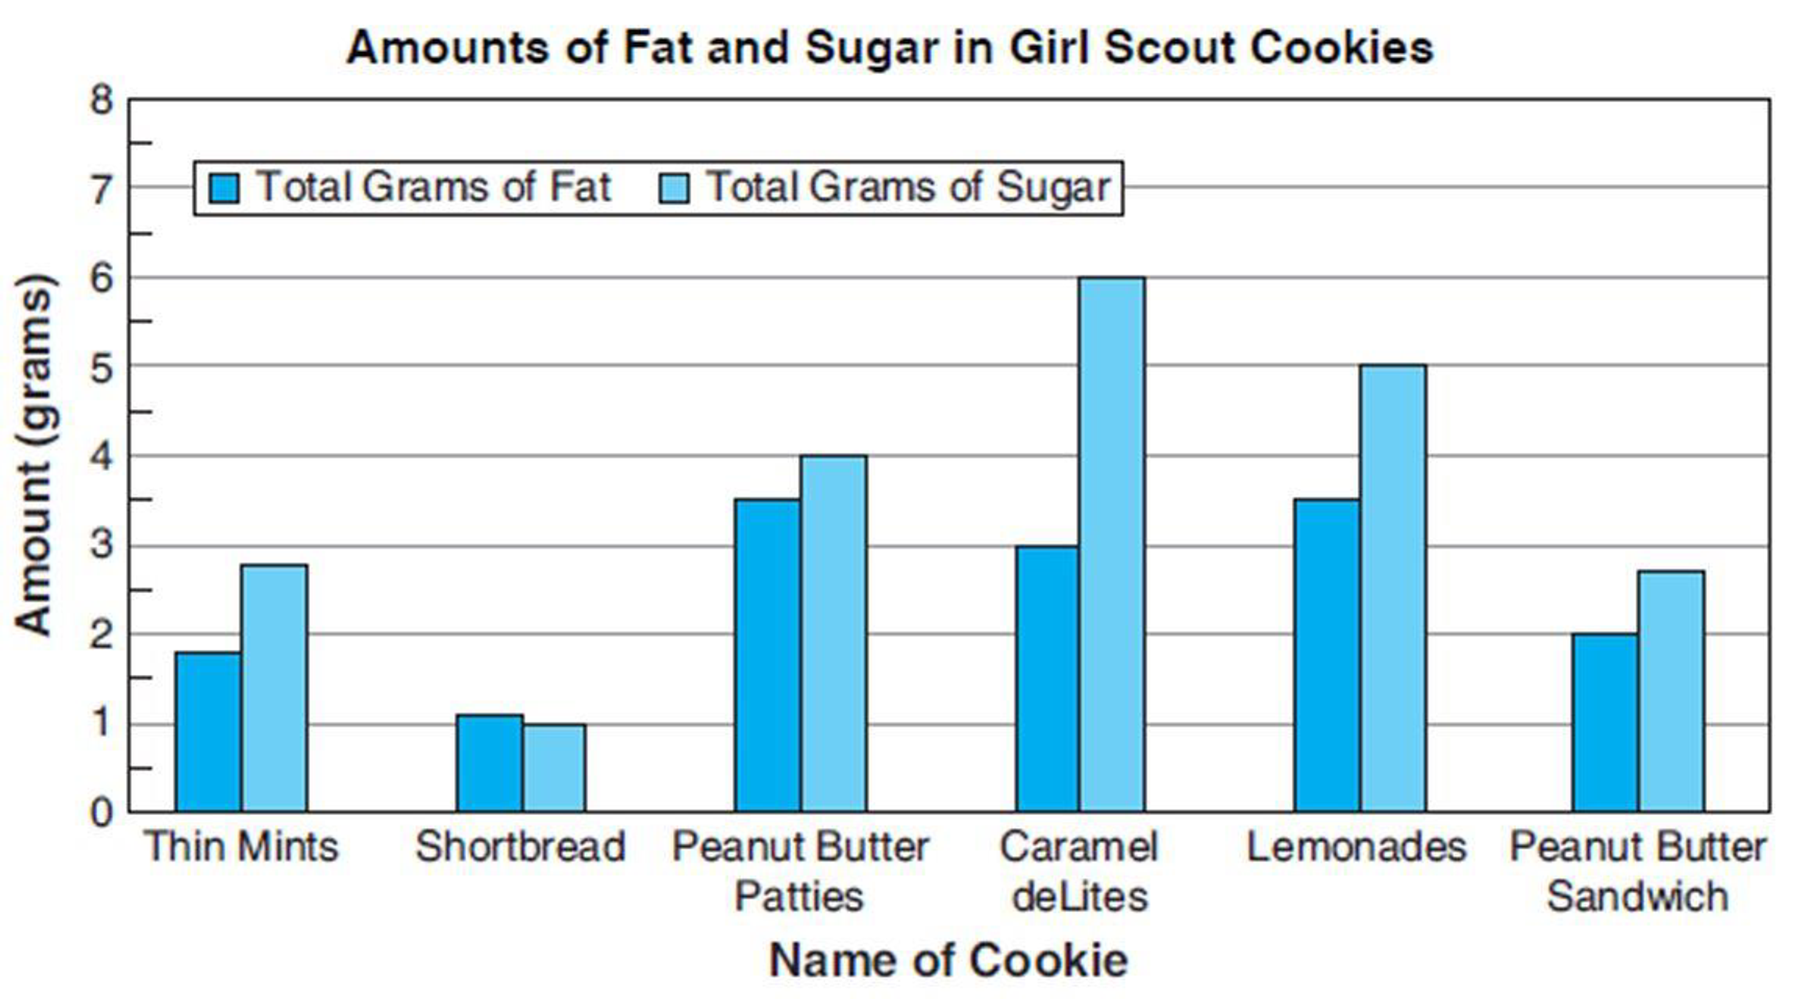 Chapter 12, Problem 12APS, Which cookie appears to be the healthiest (as measured by the fewest combined amounts of fat and 